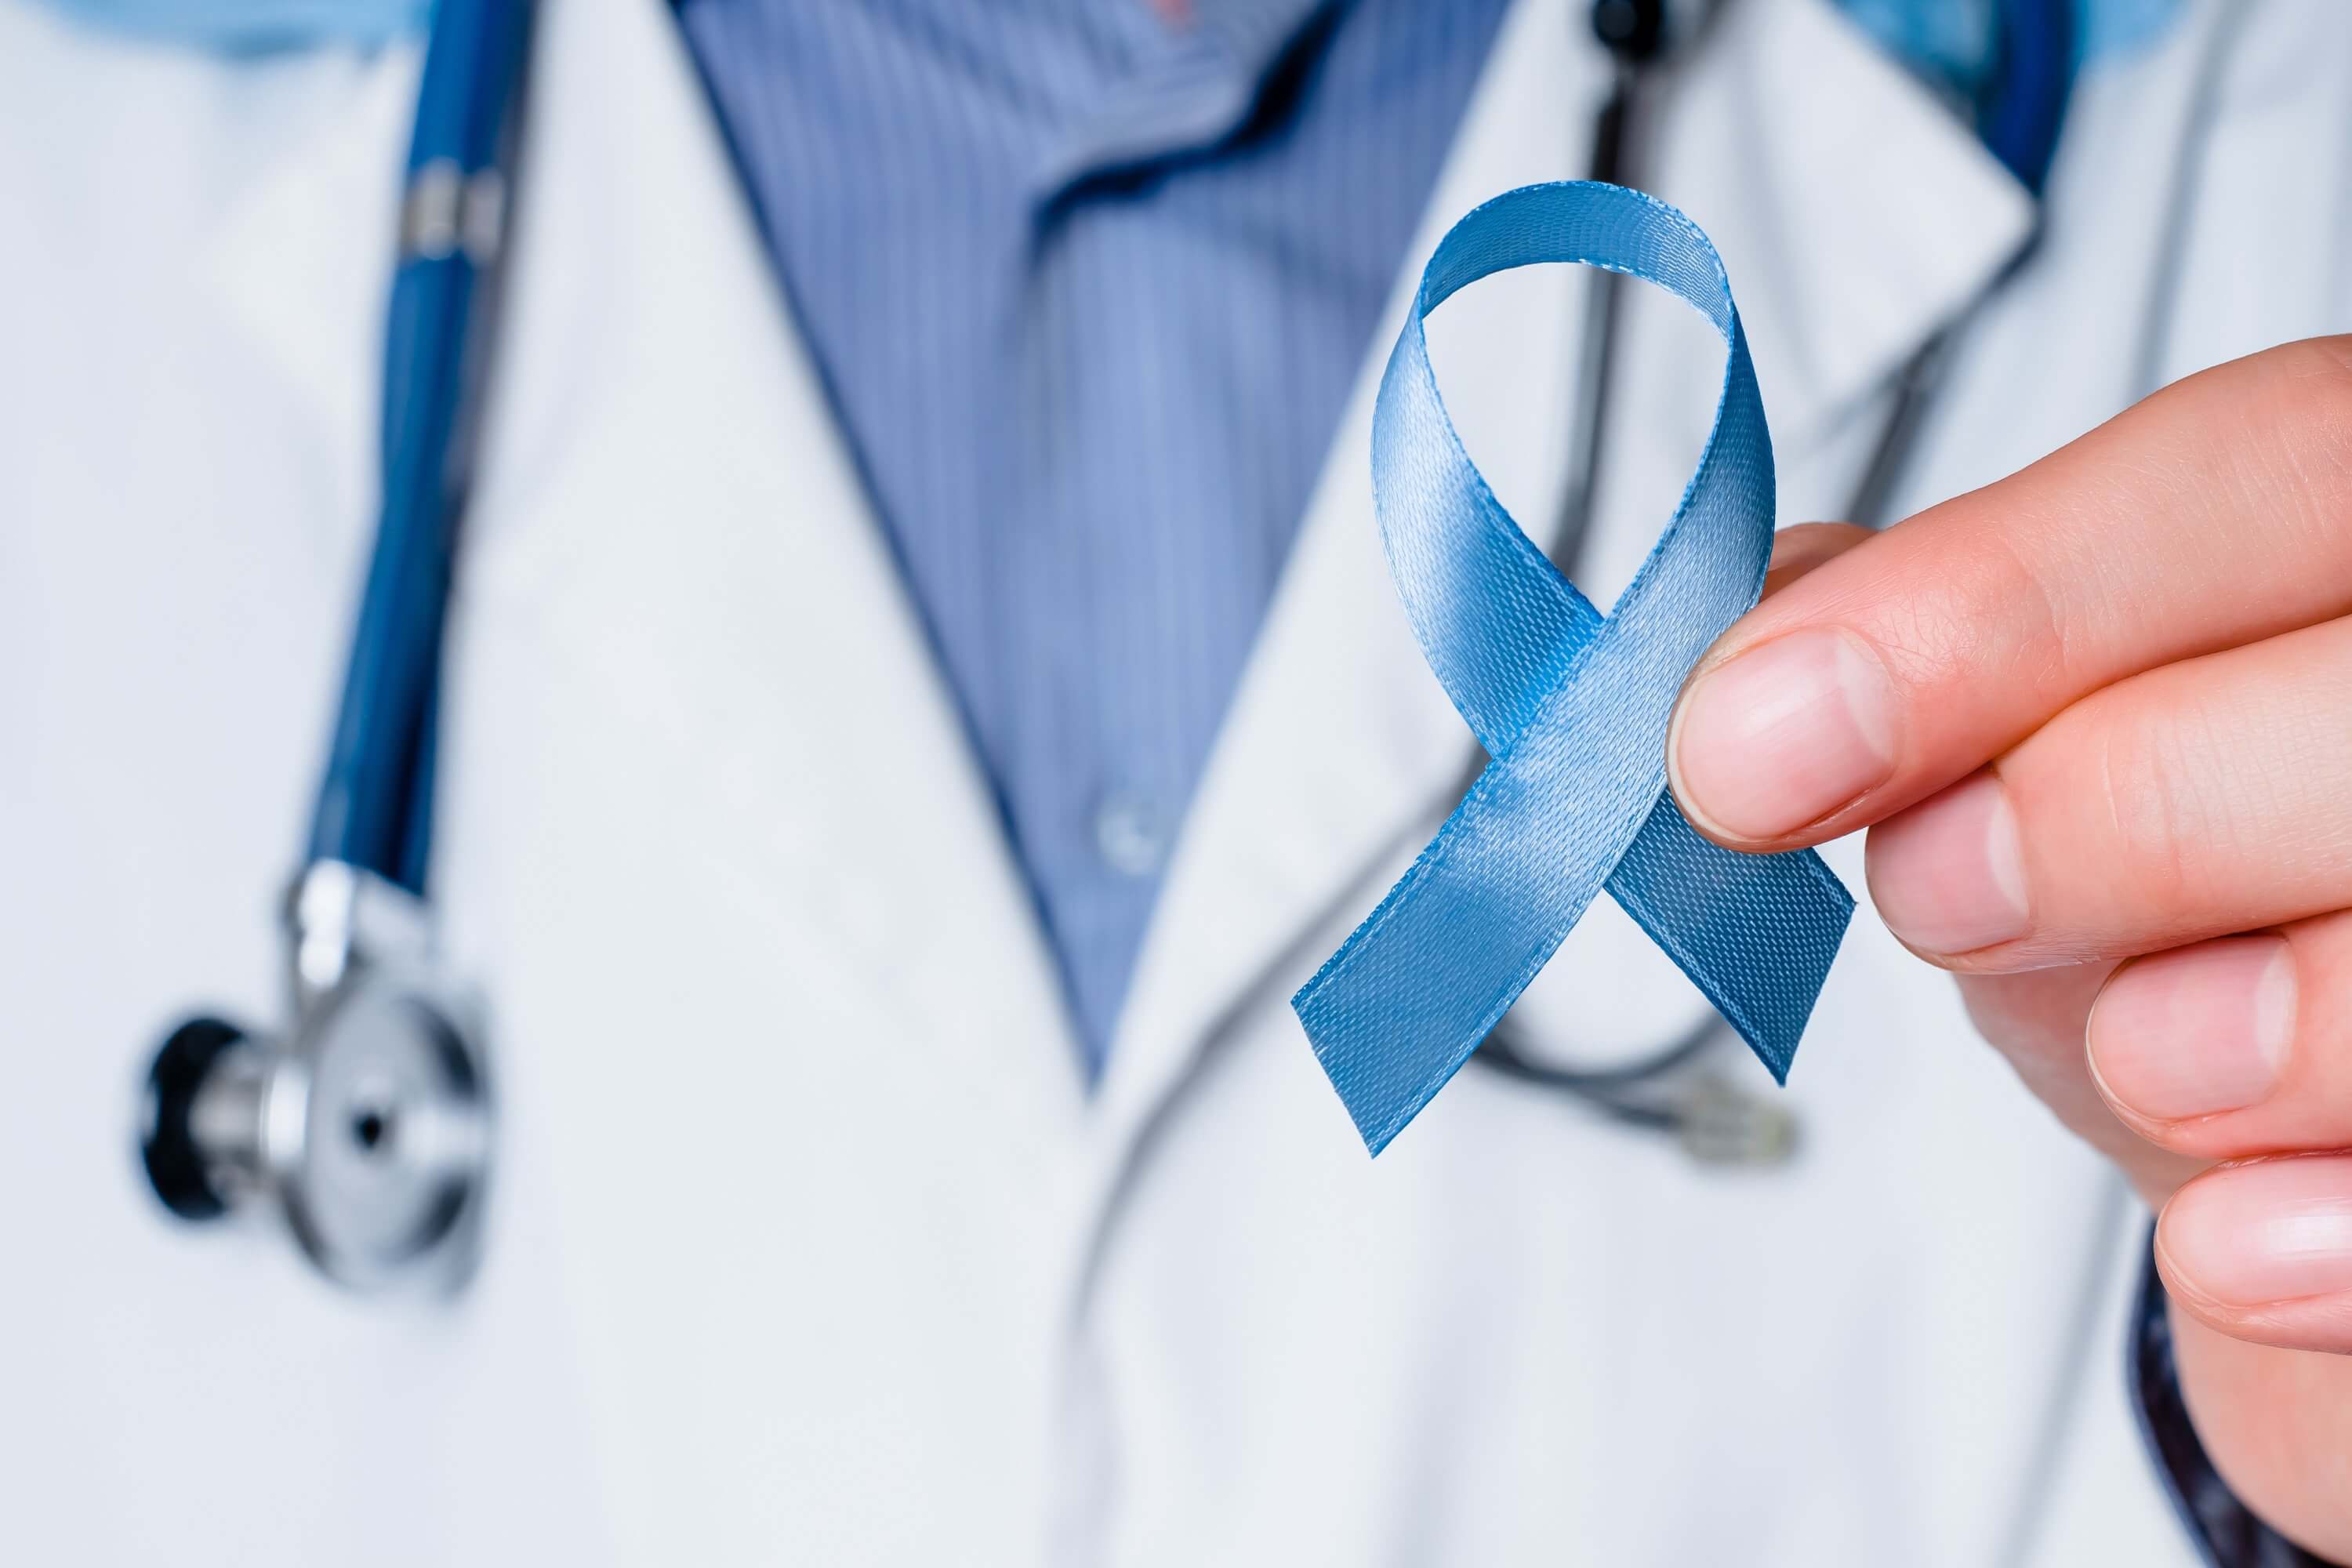 Lancet study finds prostate cancer cases to double by 2040